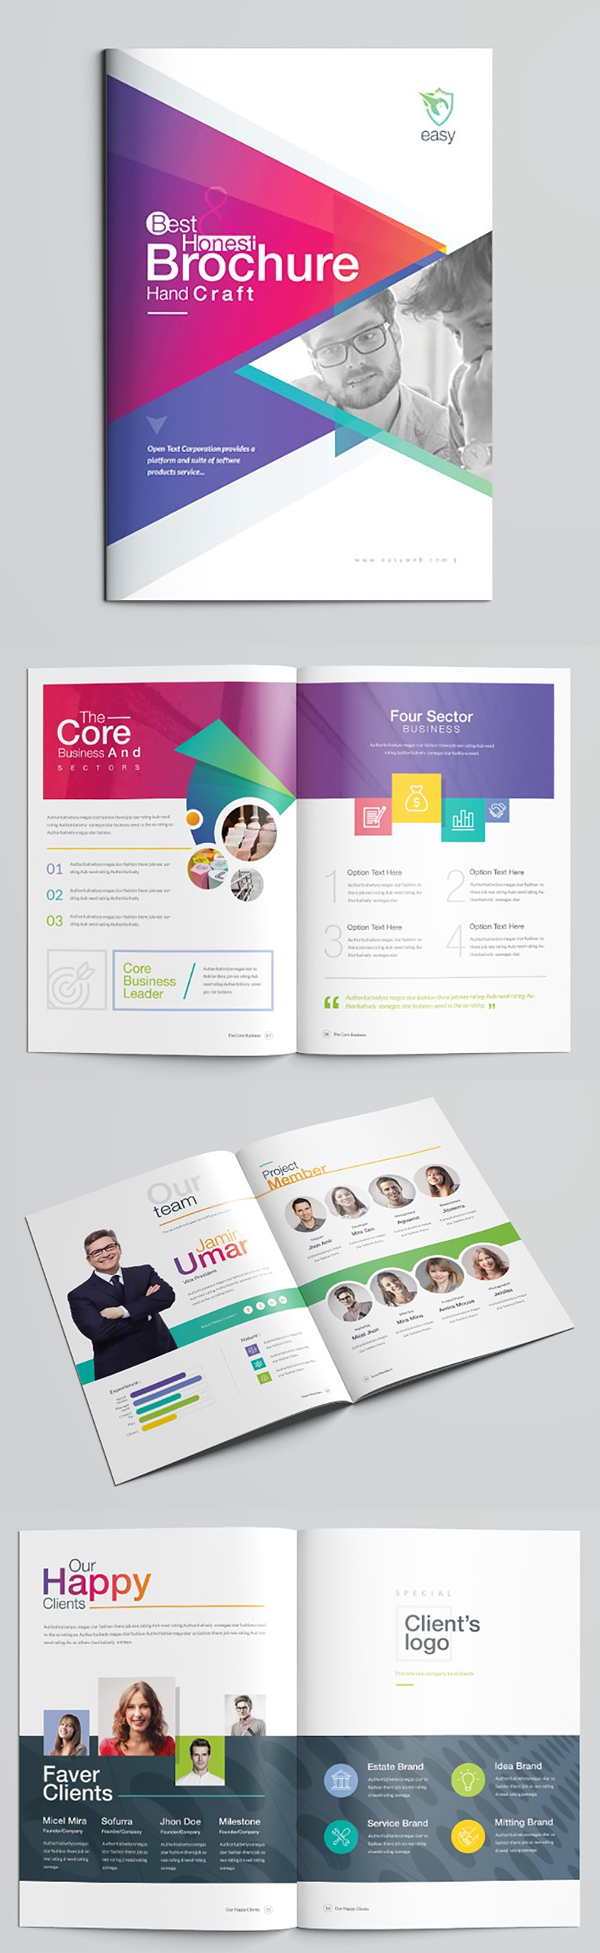 Awesome Brochure Template